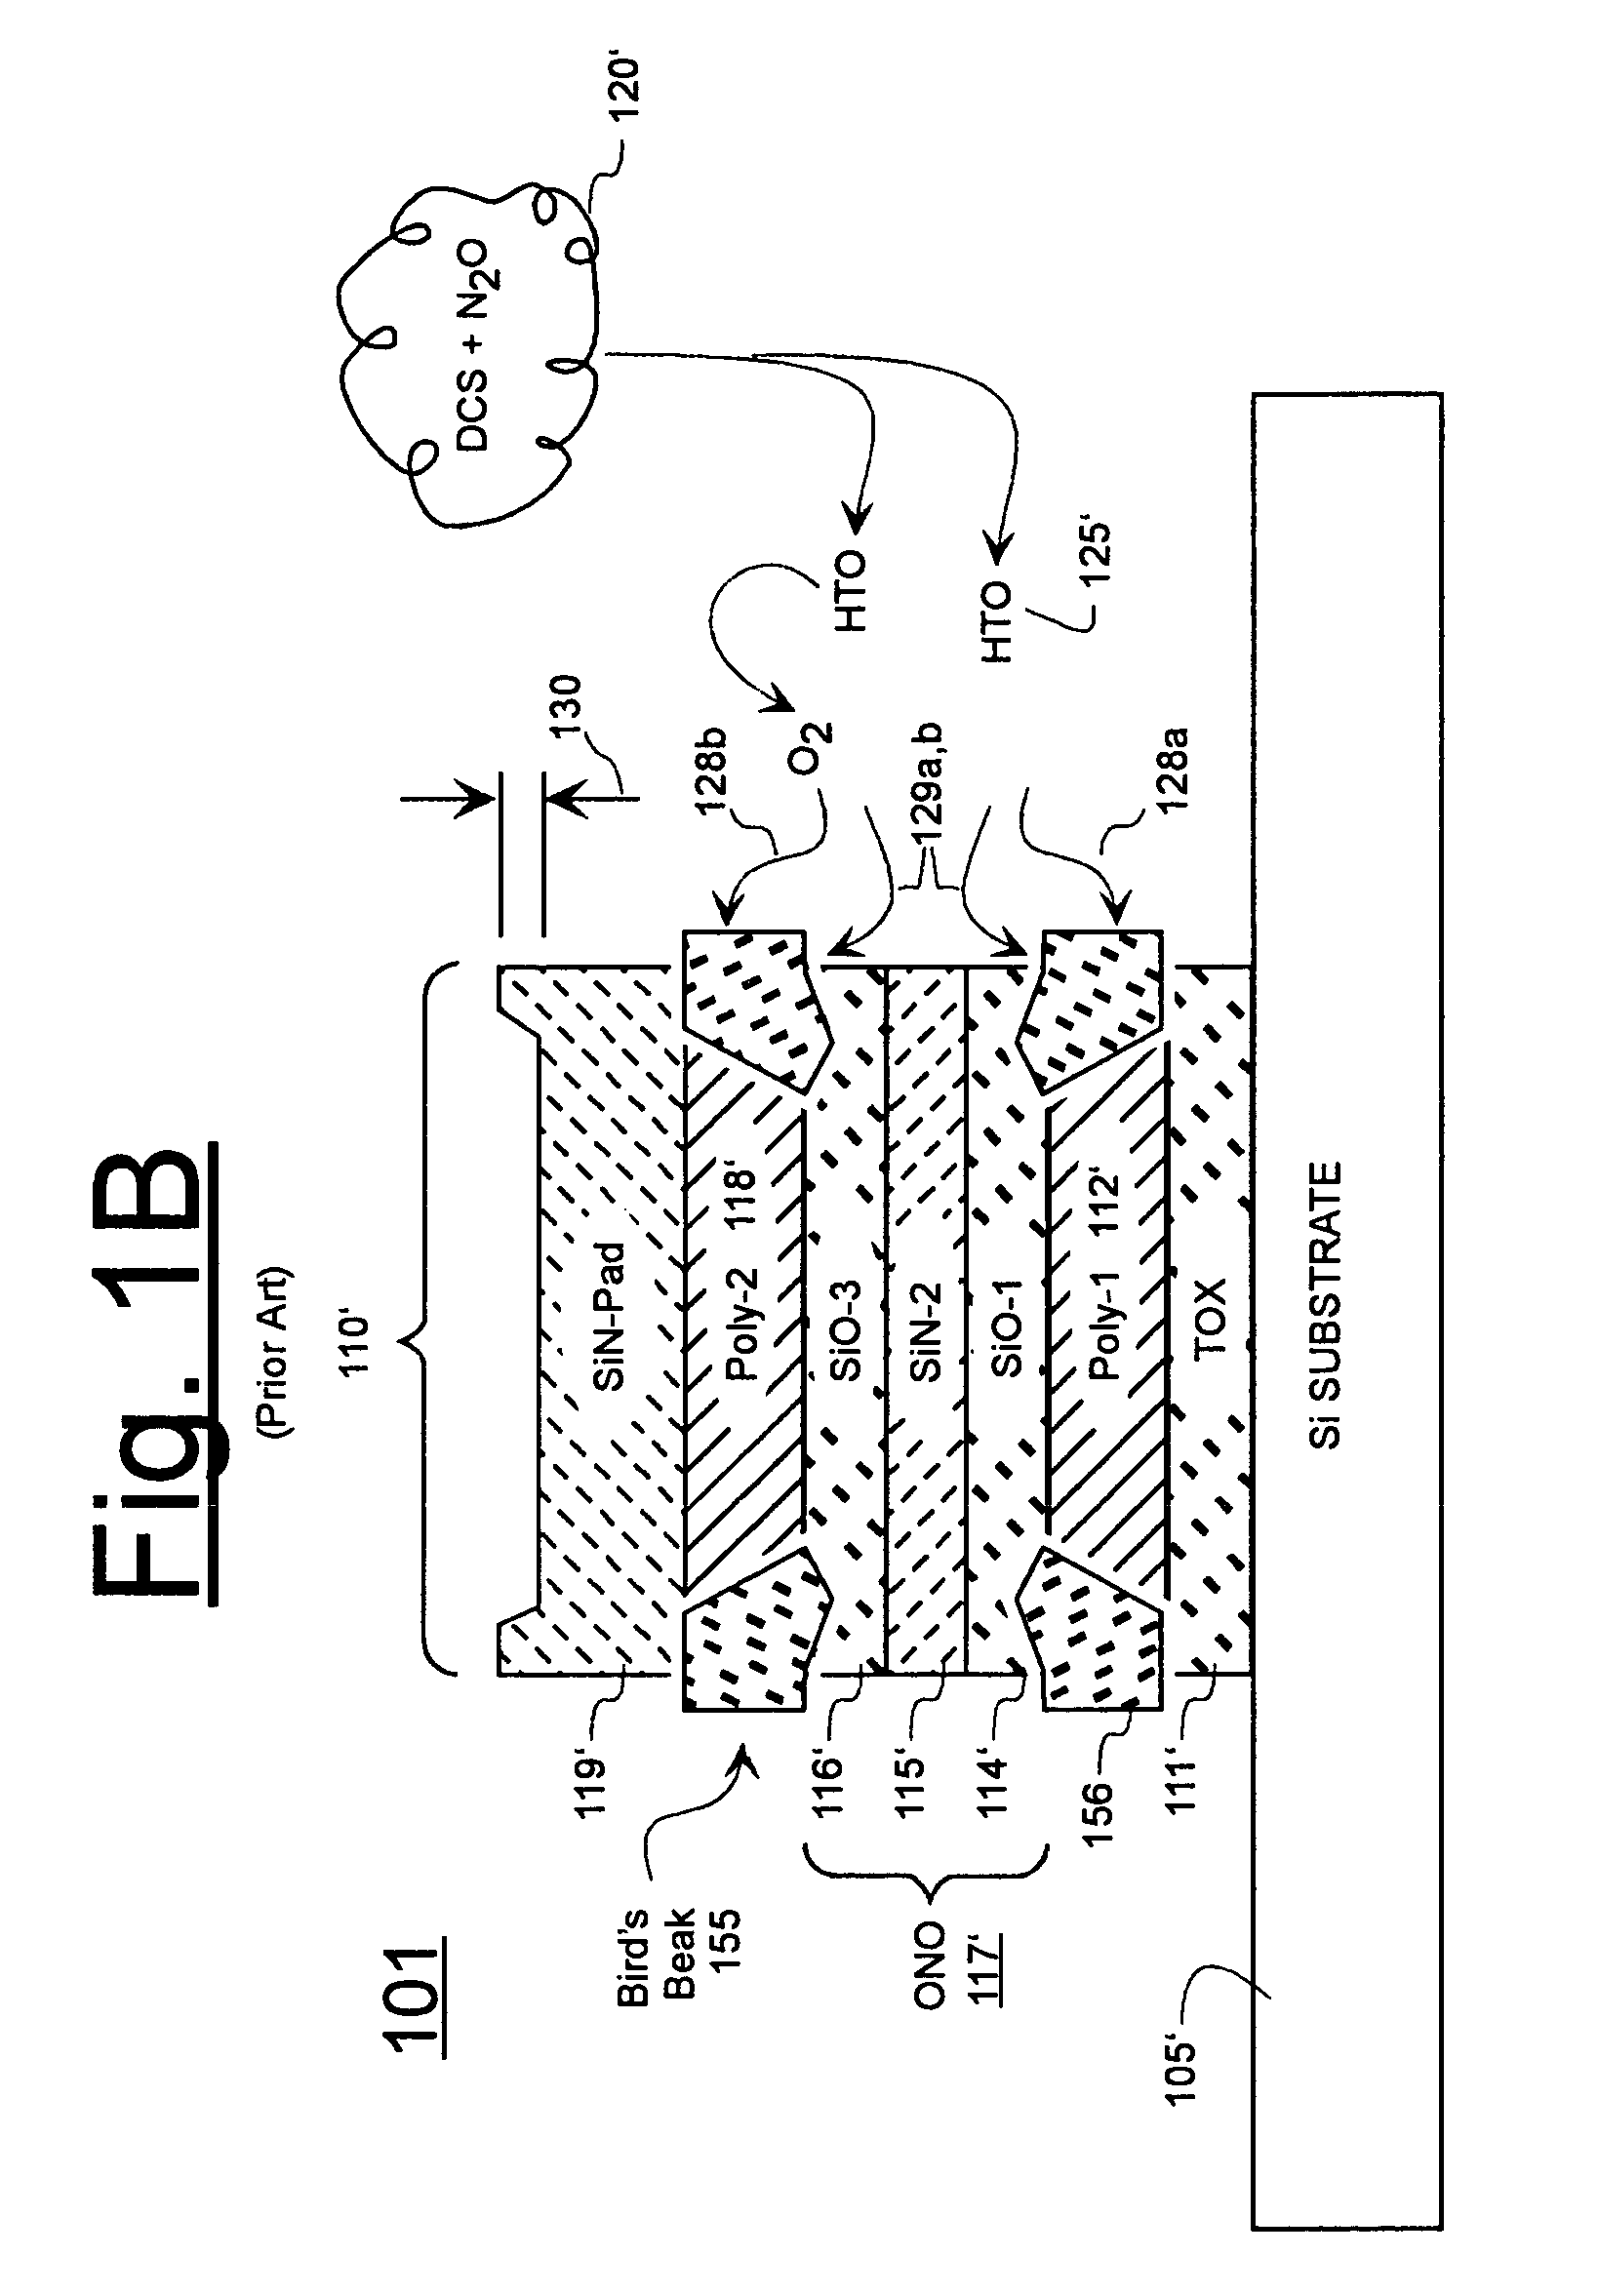 Method of forming ONO-type sidewall with reduced bird's beak